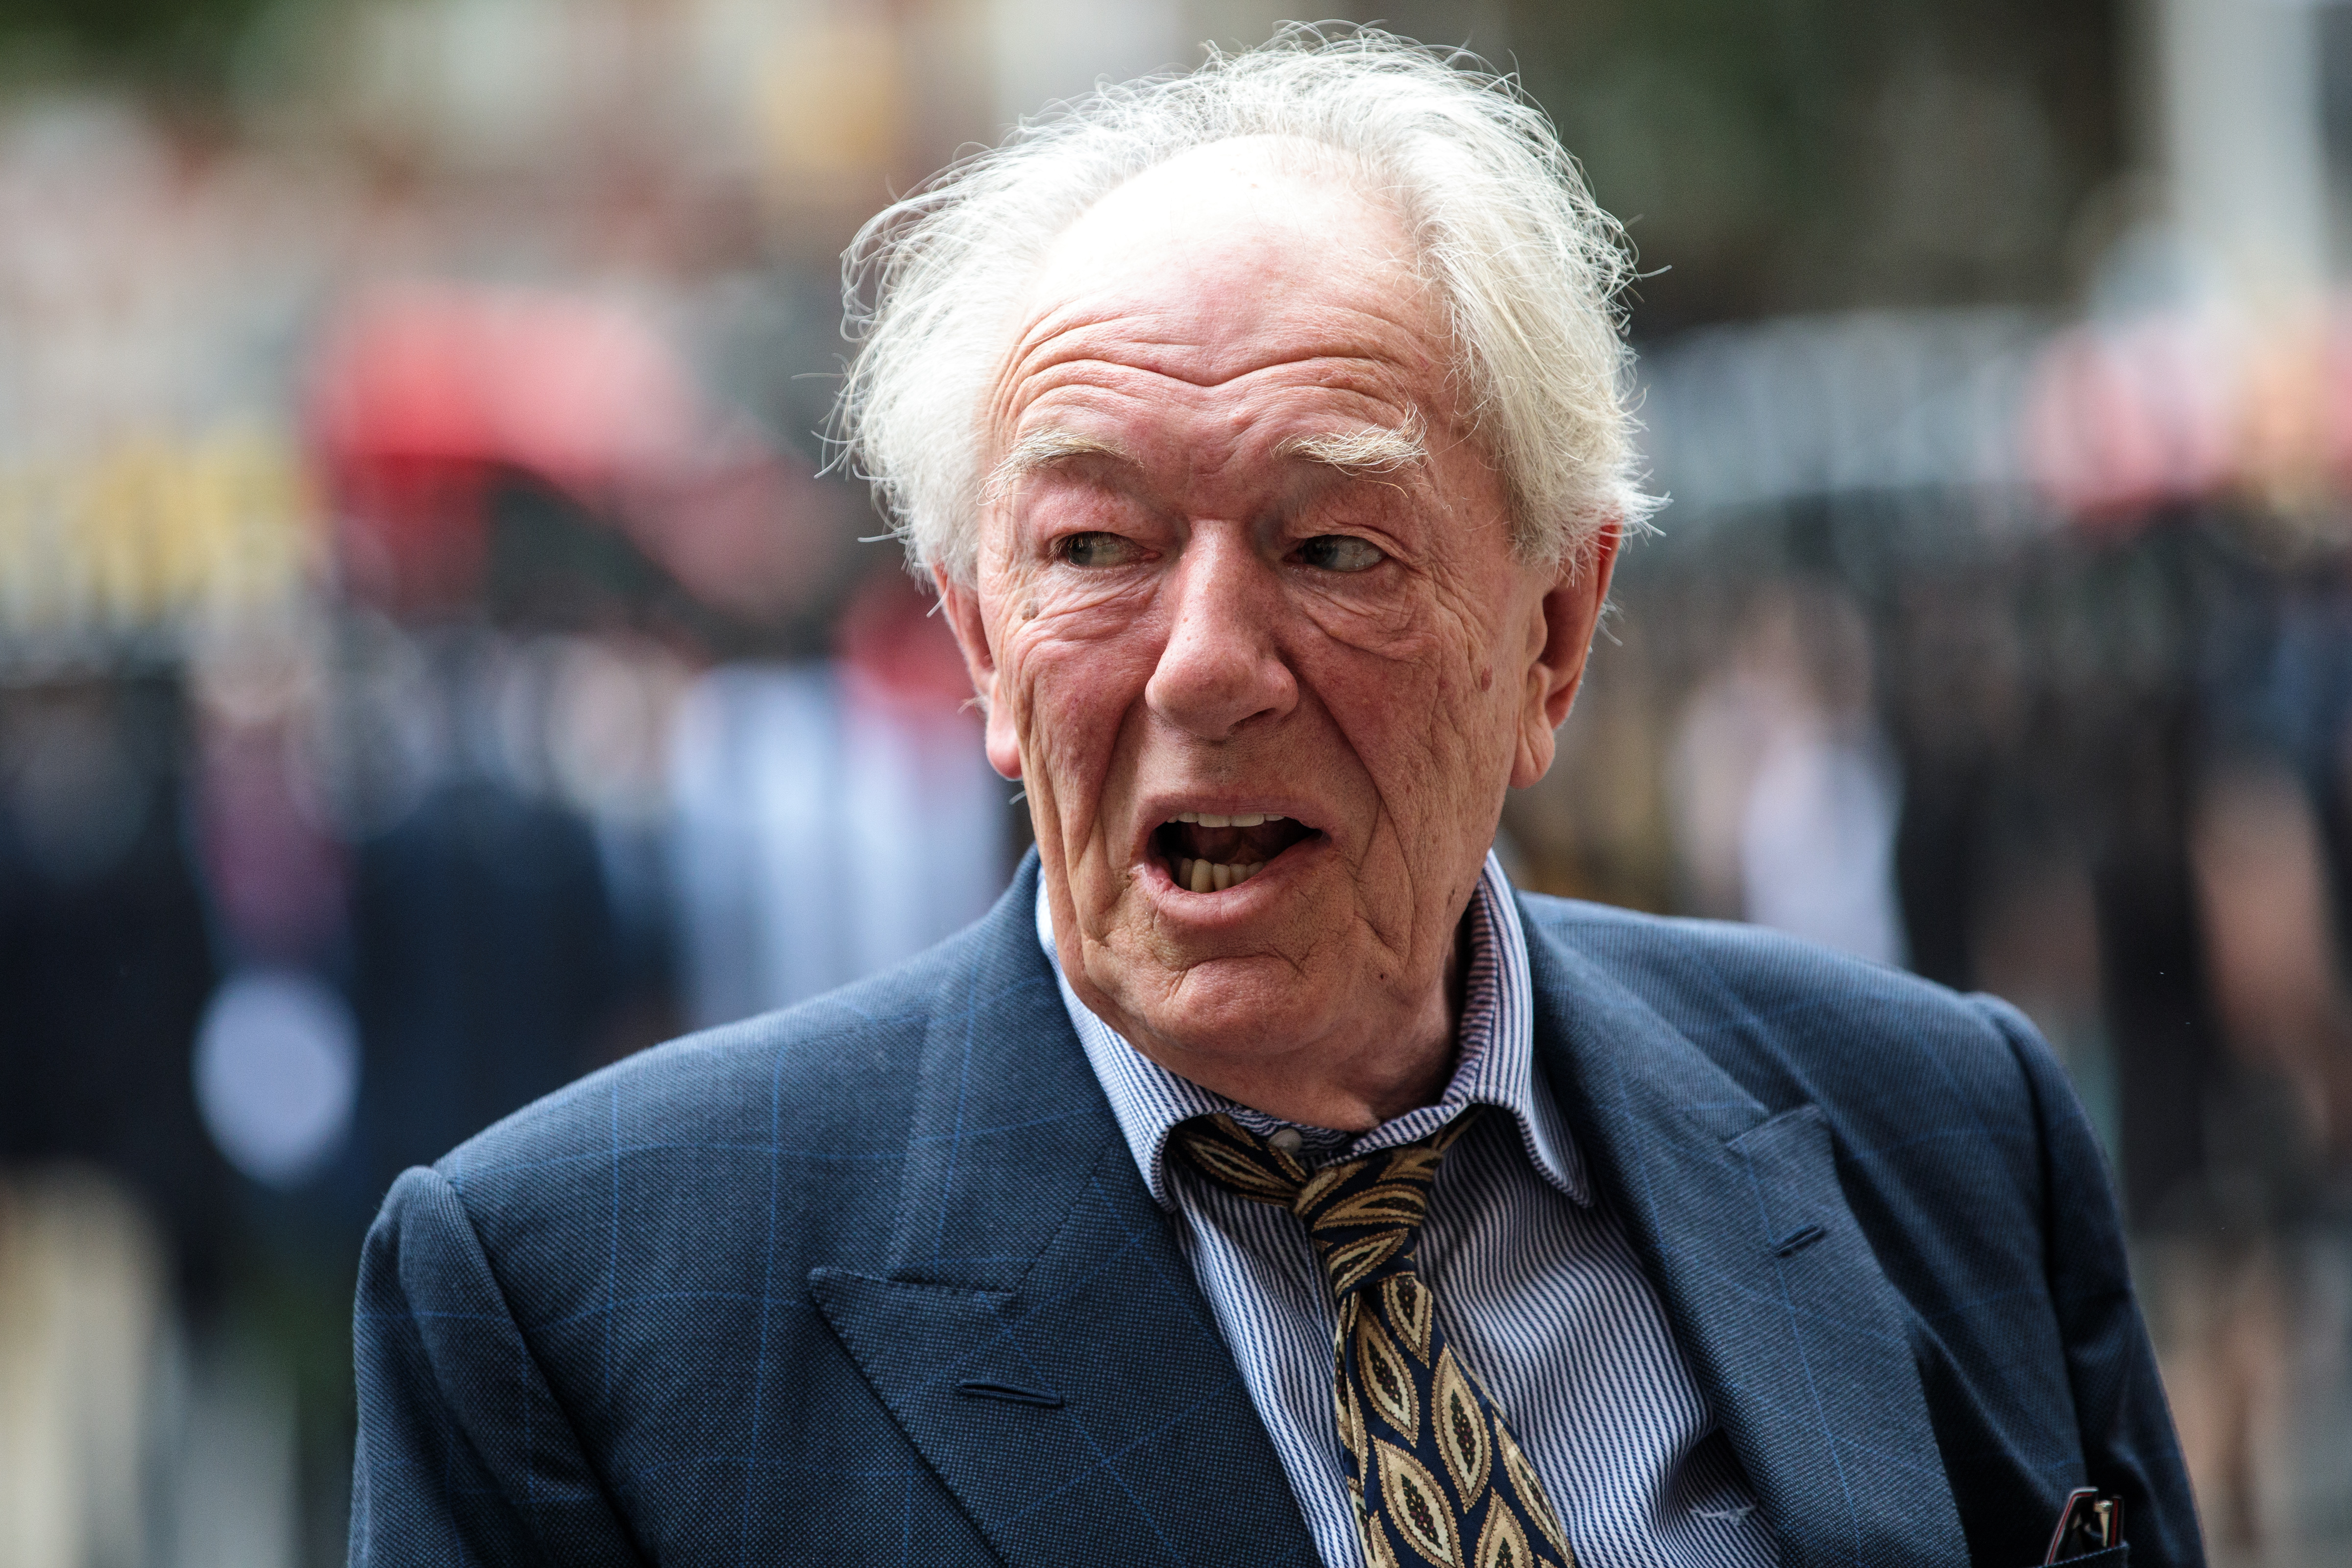 Michael Gambon seen arriving at Westminster Abbey for a memorial service honoring theatre great Peter Hall on September 11, 2018, in London, England | Source: Getty Images